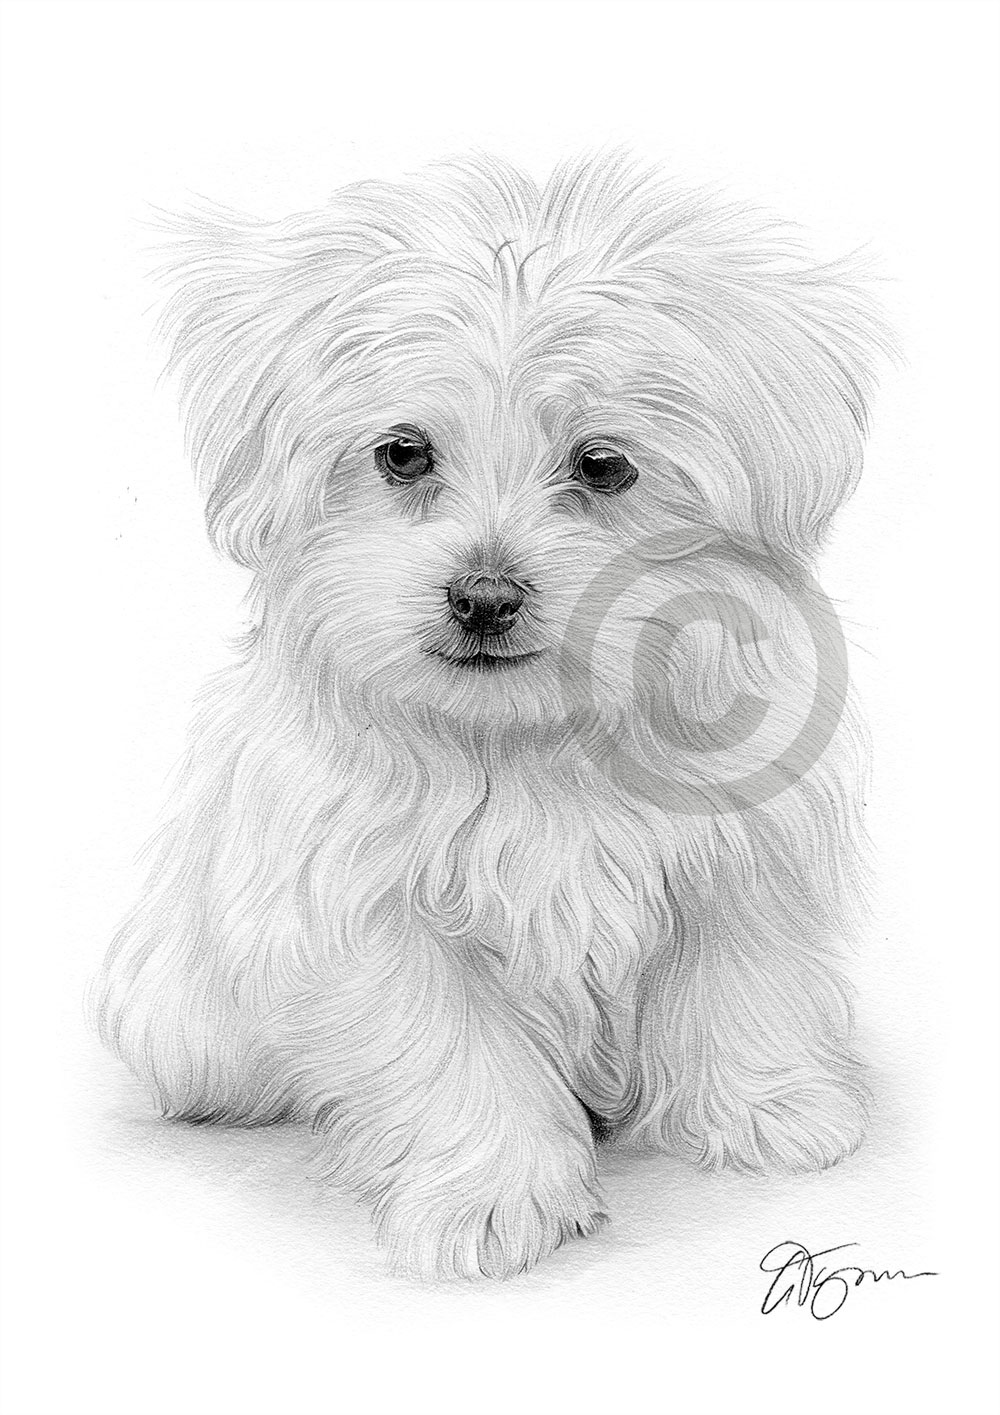 Pencil drawing of a Maltese puppy by UK artist Gary Tymon